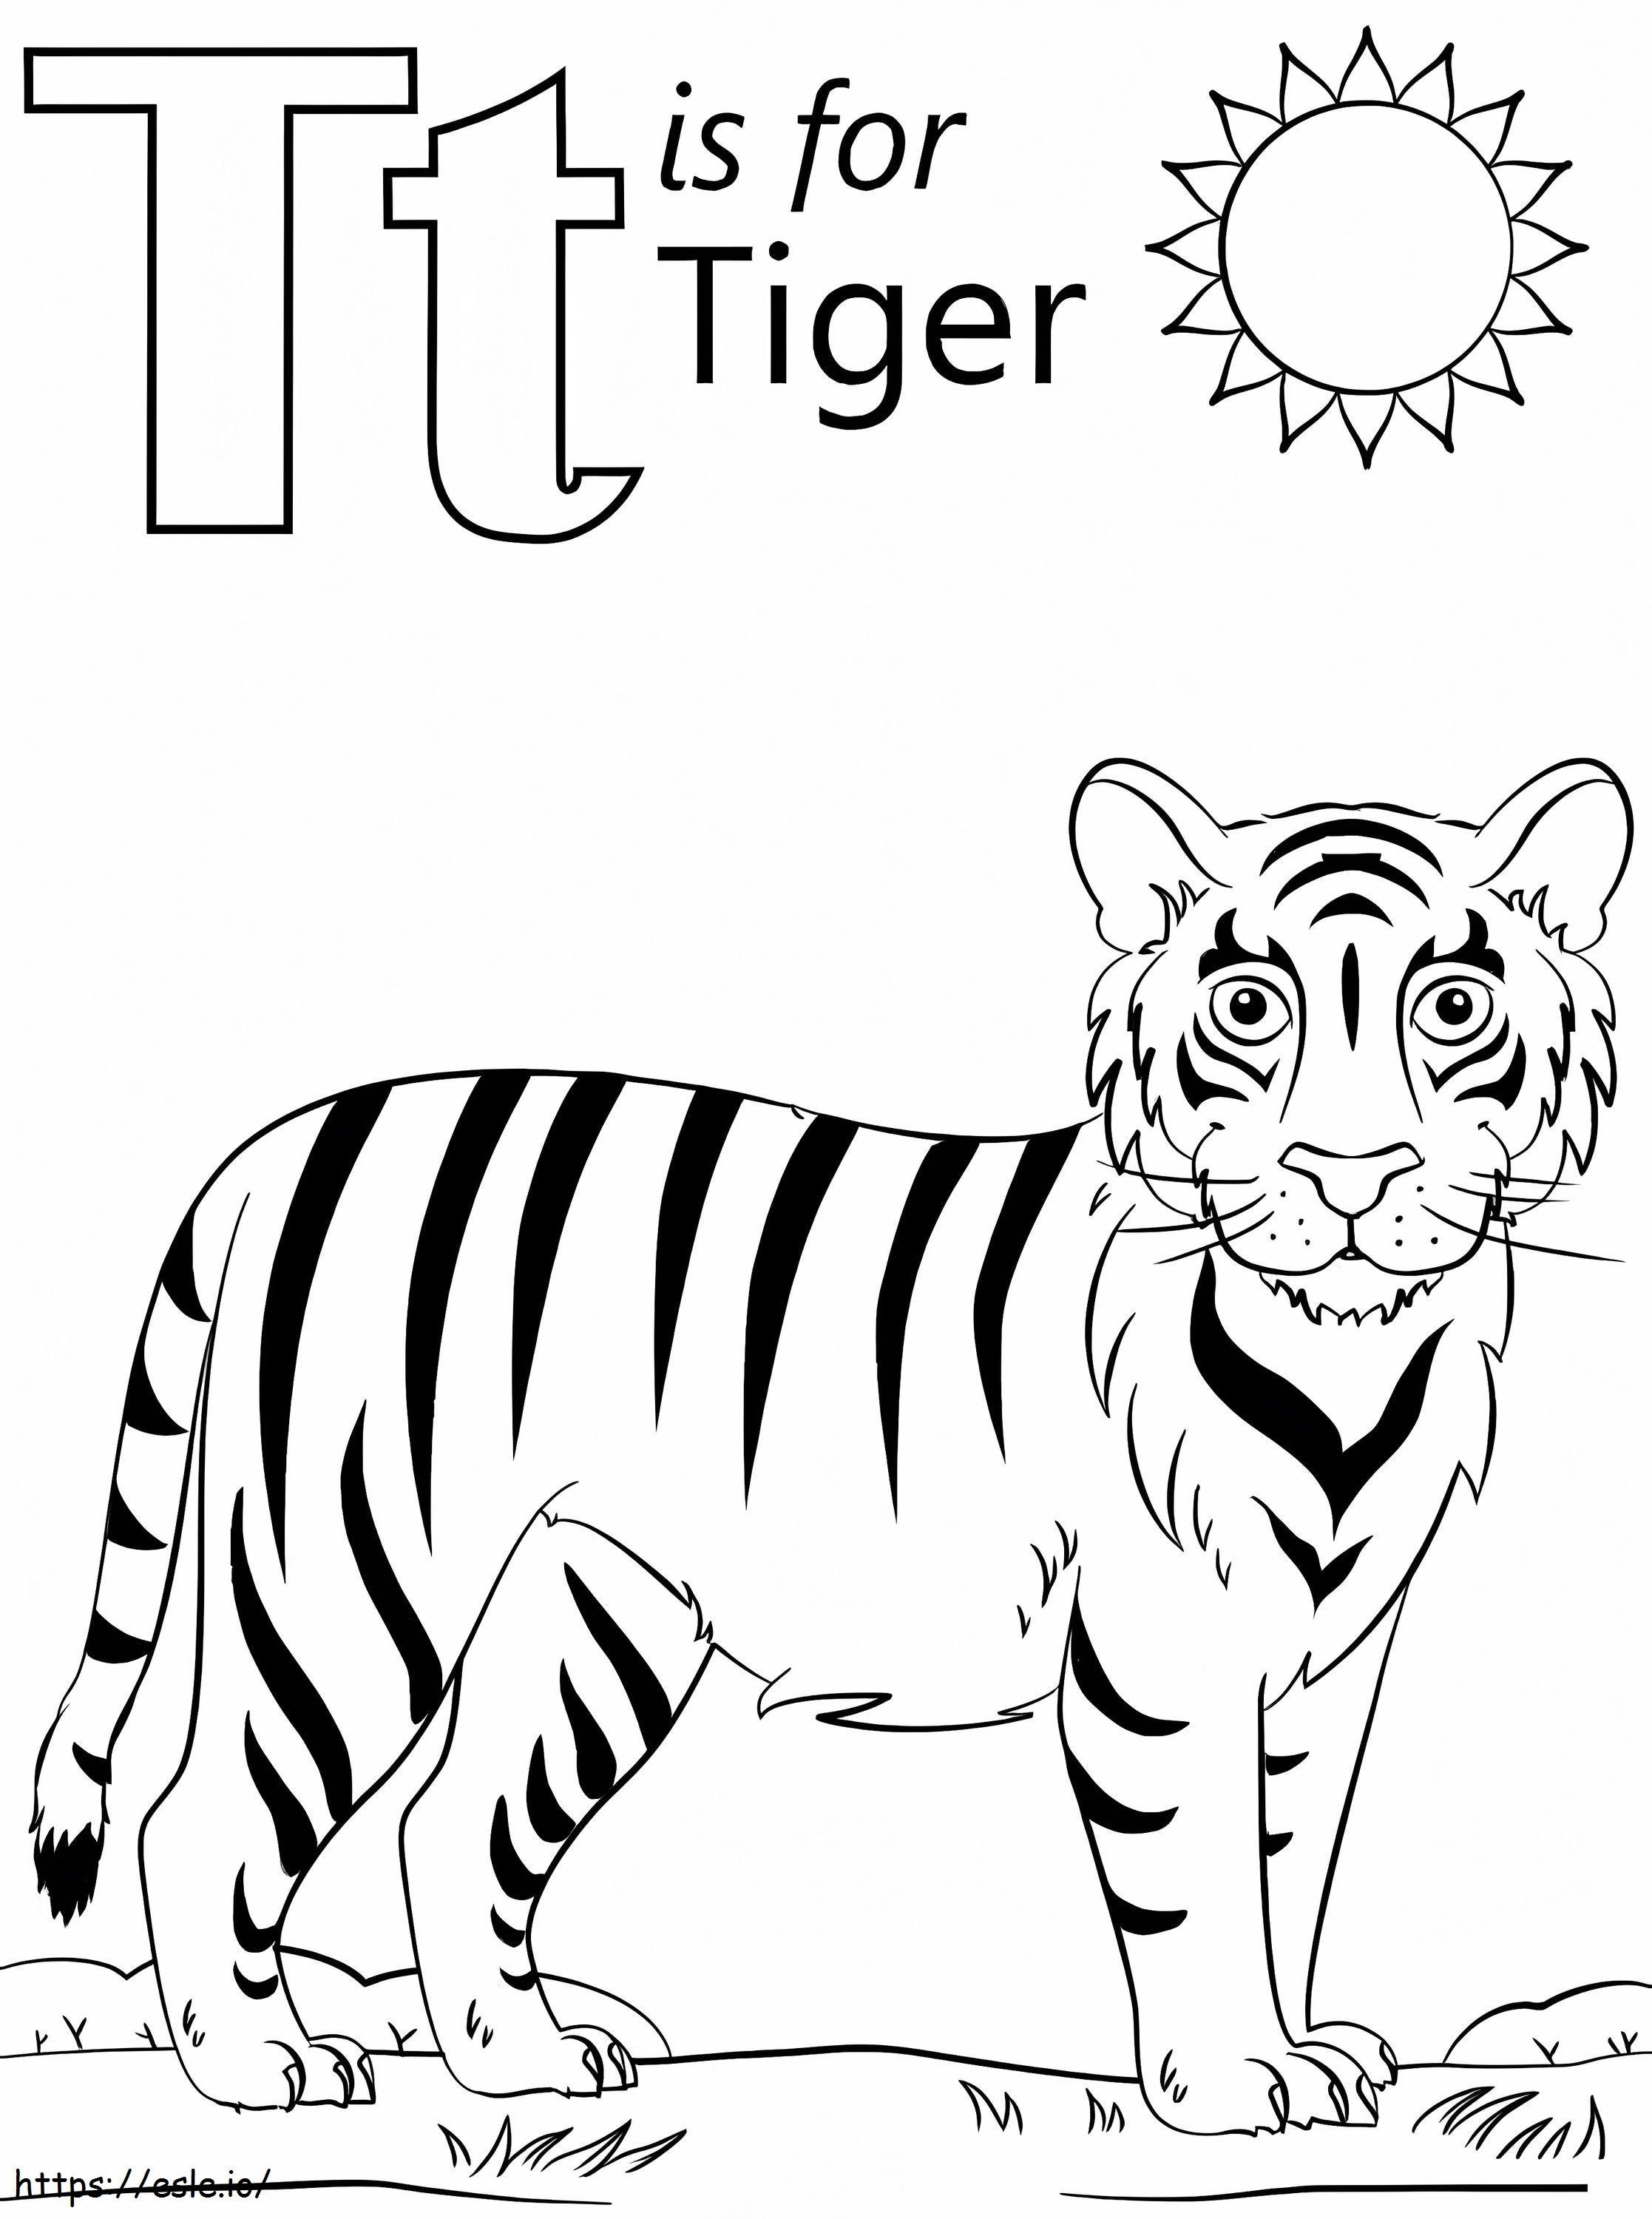 Tiger Letter T coloring page